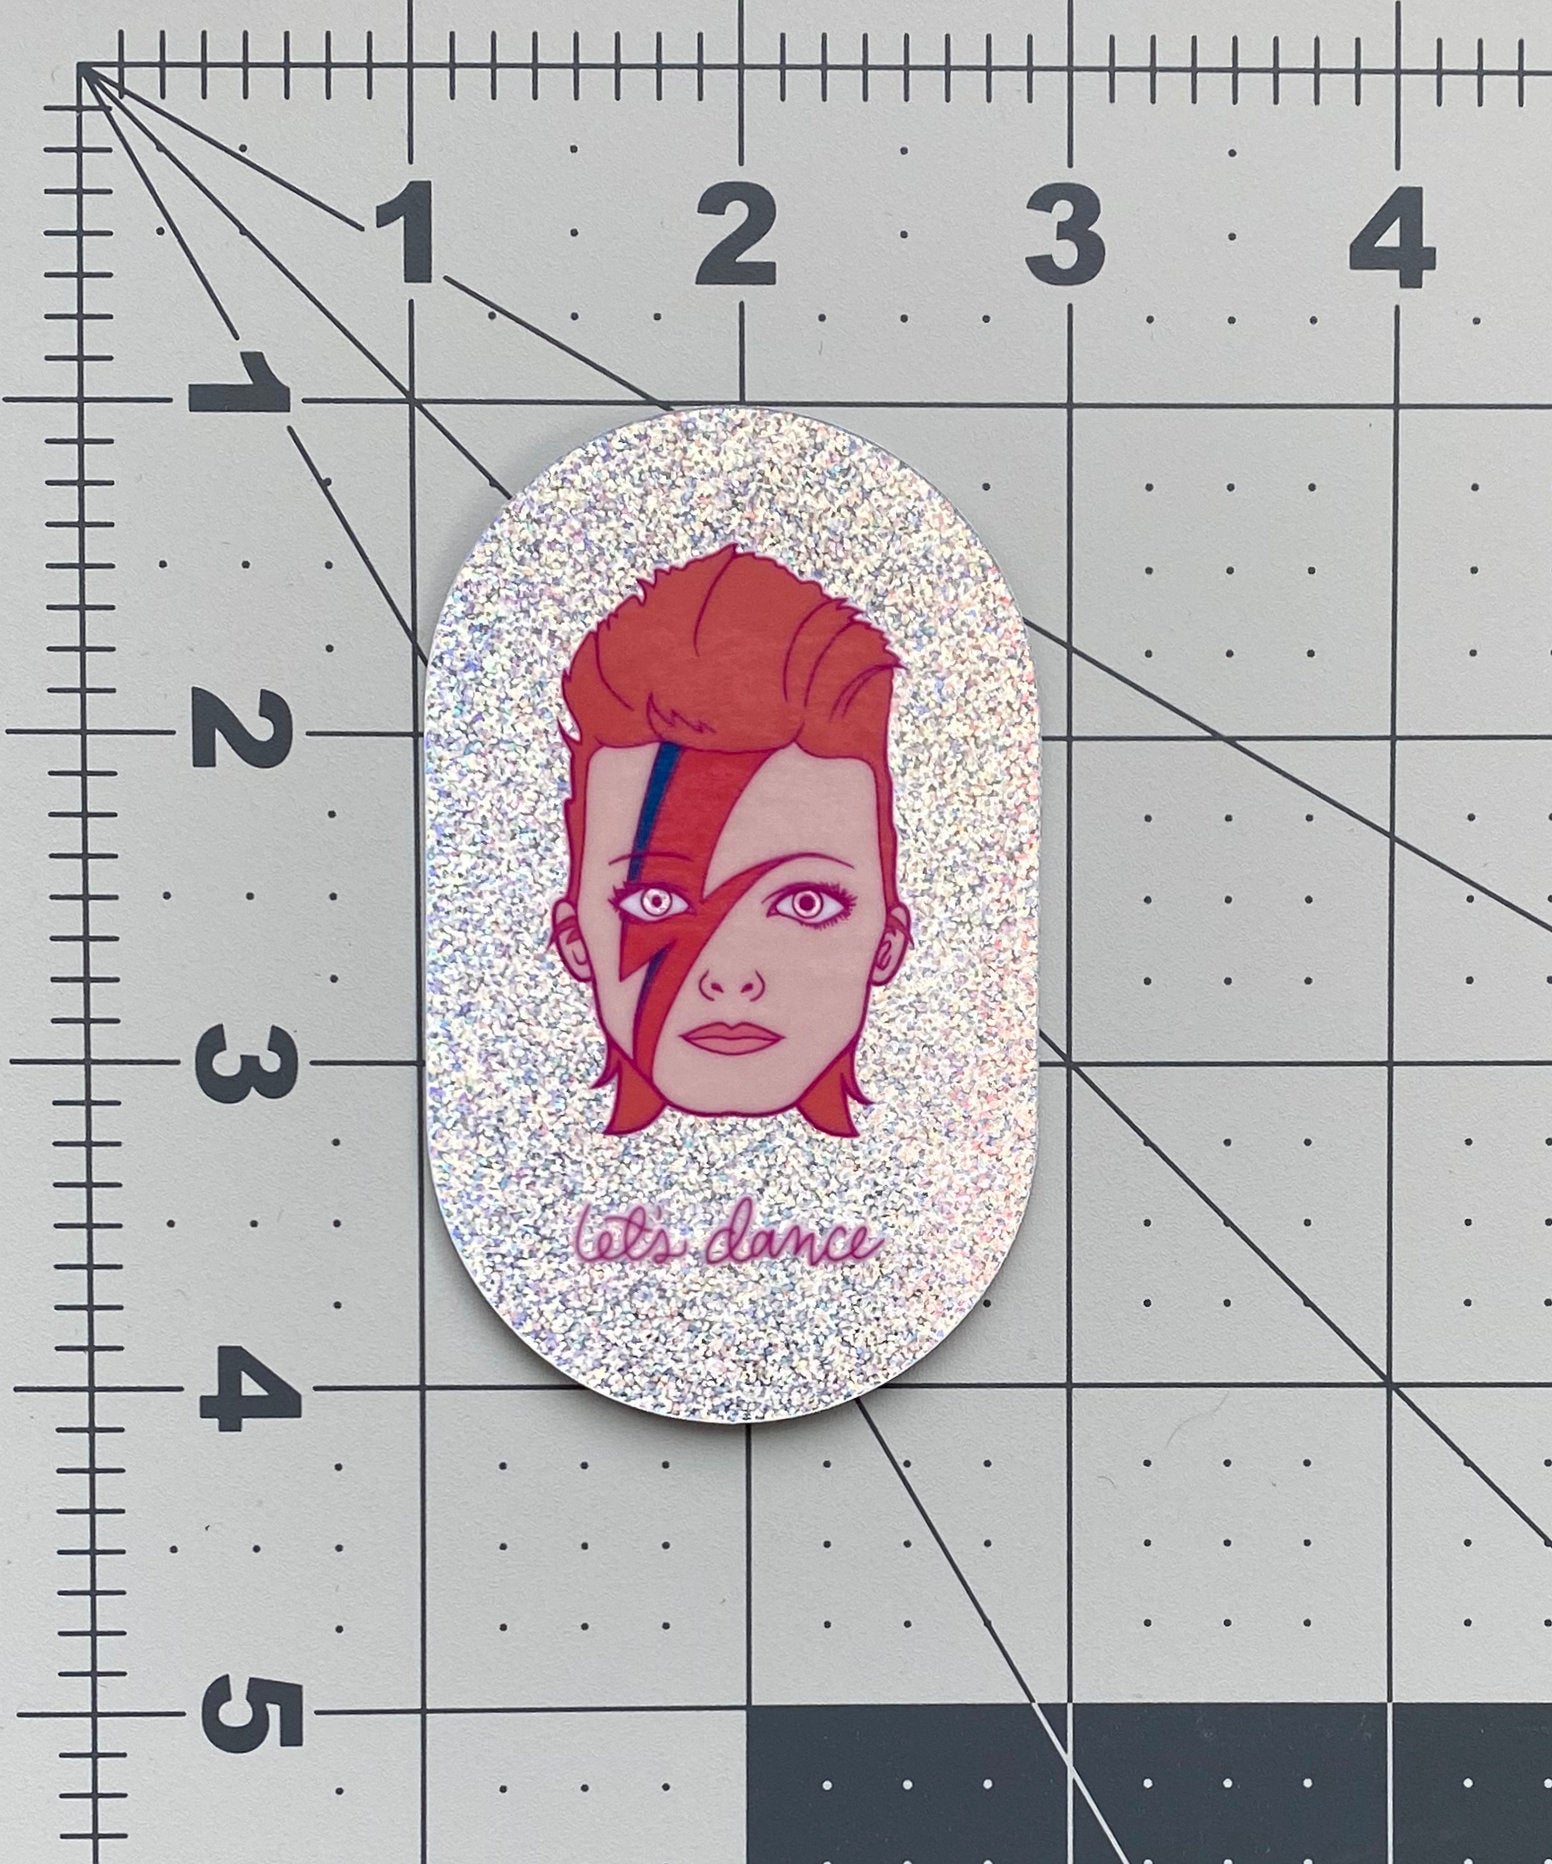 An illustration of David Bowie's head with the phrase "let's dance" on irridescent glitter vinyl. The sticker sits on a ruler mat to show the sticker's size.